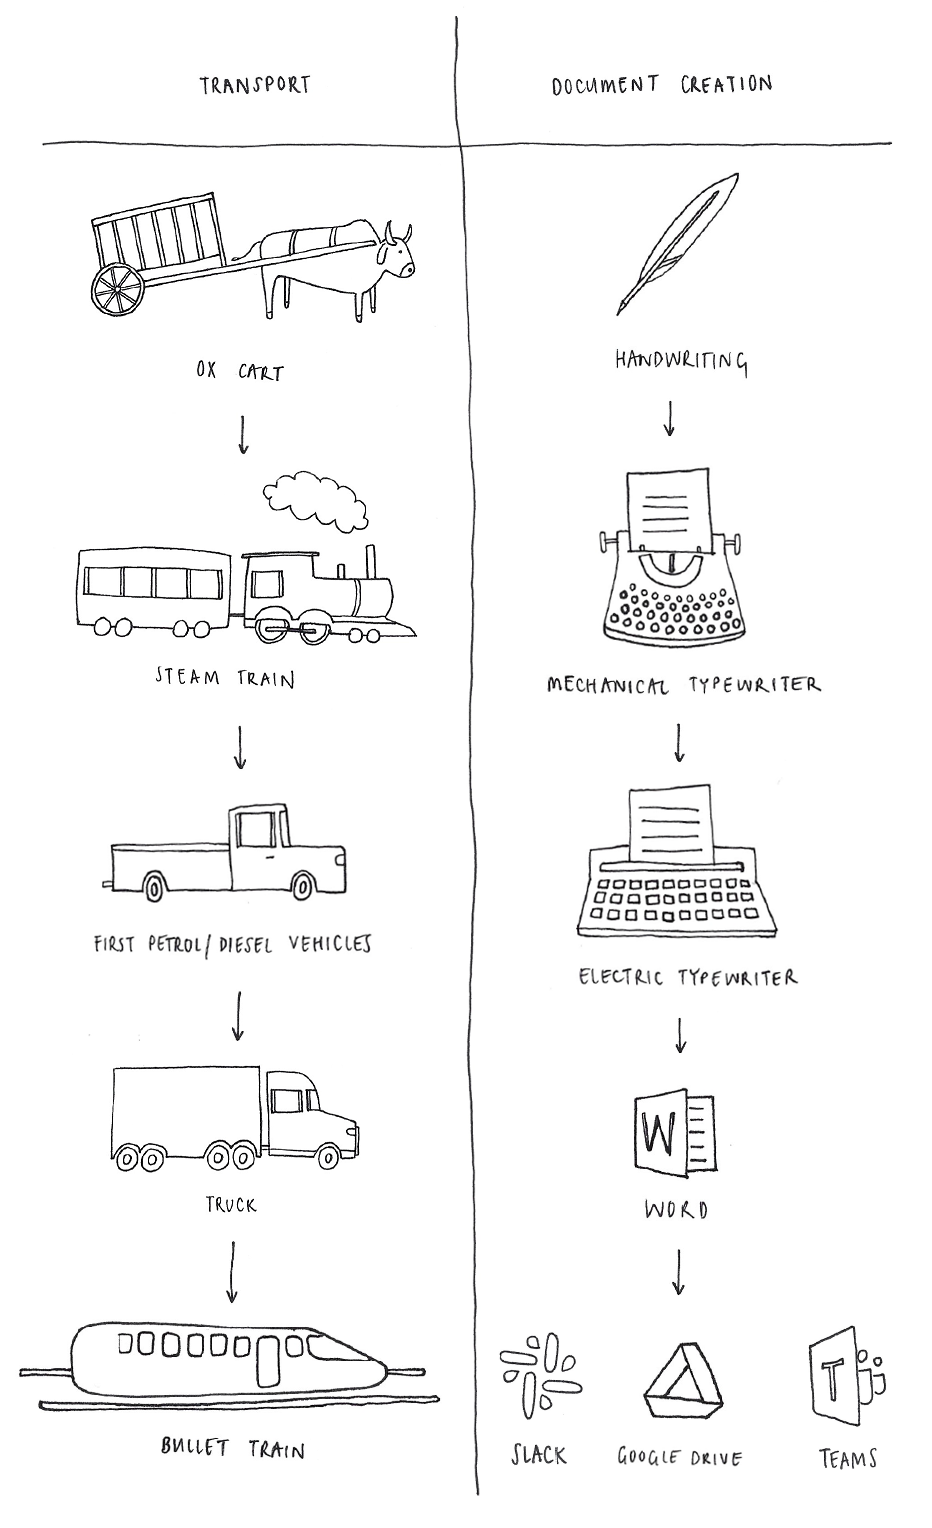 Hand-drawn illustration depicting two colums, with transport and document creation evolving in parallel: transport tracks an ox cart turning into a steam train, then a first petrol/diesel vehicle, a truck, a bullet train. Document creation tracks: handwriting turns into a mechanical typewriter, then an electric typewriter, Microsoft Word, then Slack, Google Drive, and Microsoft Teams.